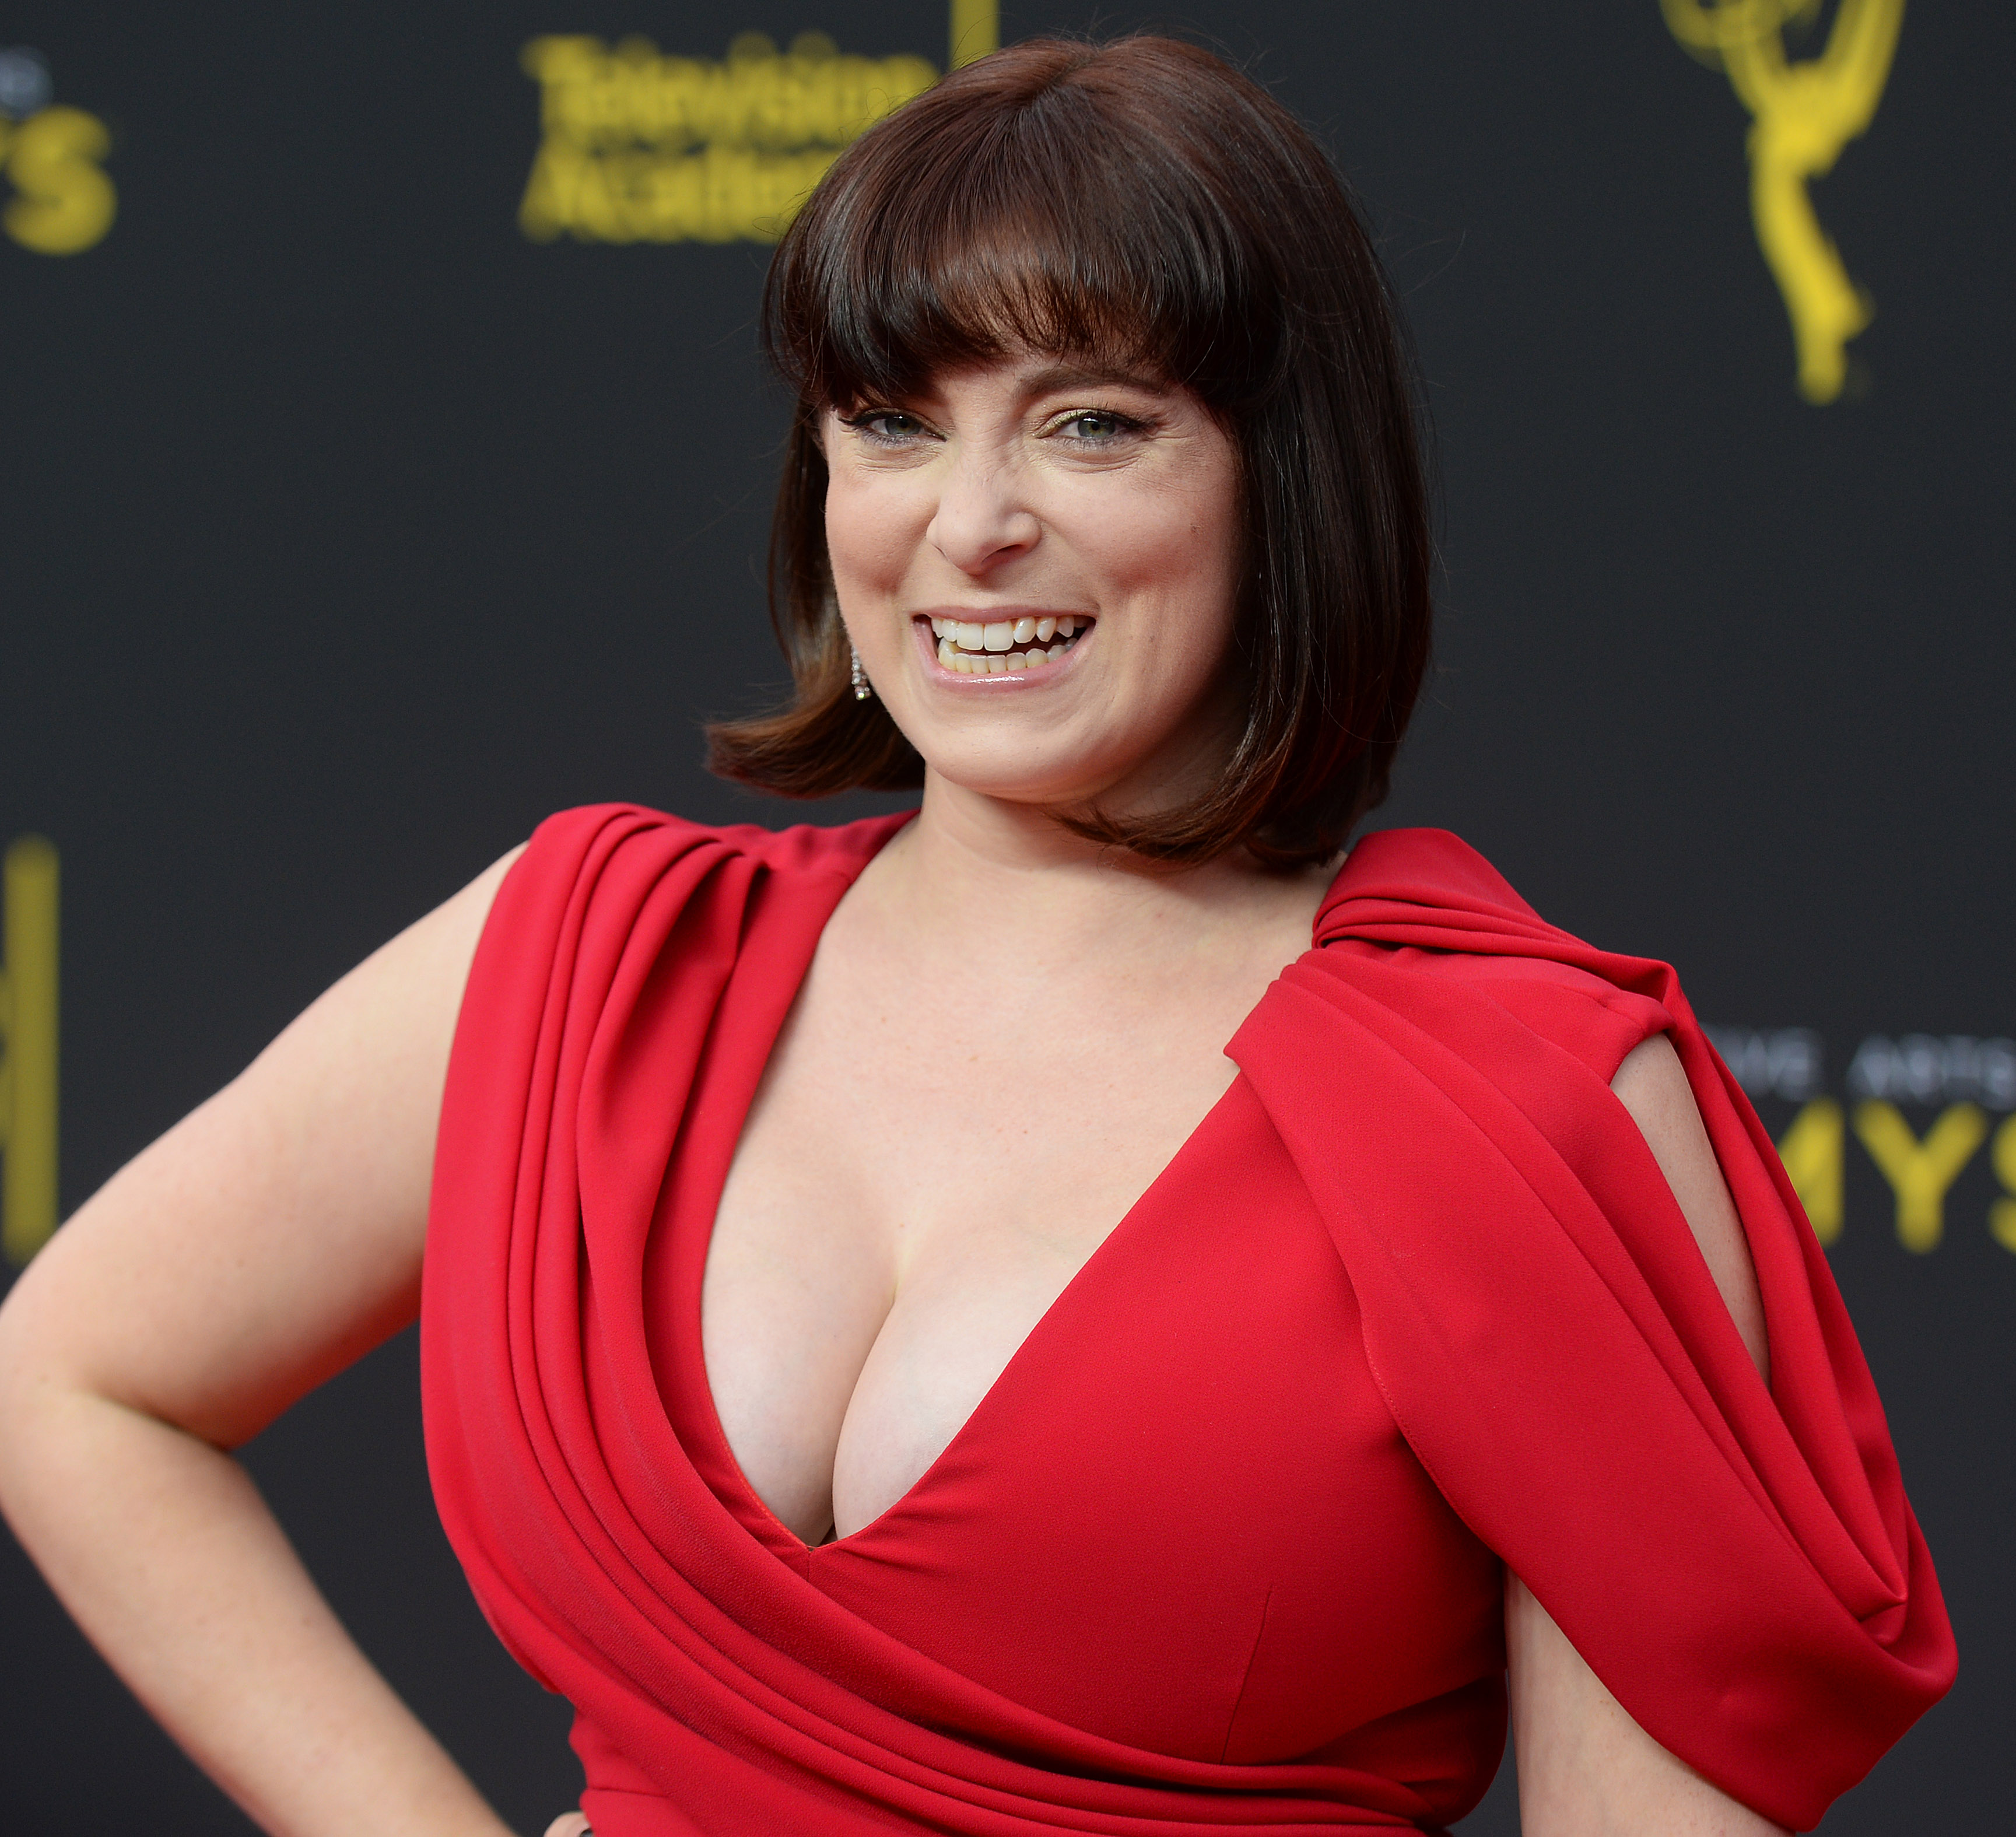 <p>Emmy- and Golden Globe-winning "Crazy Ex-Girlfriend" actress Rachel Bloom has long lamented her breasts. She even sang about them in the song "Heavy Boobs" on her old show. She also wrote about her chest in the foreword of Caitlin Brodnick's memoir about testing positive for the BRCA1 gene mutation "Dangerous Boobies: Breaking Up With My Time-Bomb Breasts," <a href="https://www.dailymail.co.uk/tvshowbiz/article-9890383/Crazy-Ex-Girlfriend-star-Rachel-Bloom-breast-reduction-DD-chest.html">MailOnline</a> reported. "Having been boy crazy from a young age, I was delighted when the boys I pined for finally started to notice me, with my boobs drawing their eyes to my more important but subtler features, such as my smile and personality. As I got older and gained weight/went on birth control, my boobs grew from a modest B to a 'Why do I look skanky even in a T-shirt?' DD," Rachel wrote. "Sometimes, they're big in a cartoonish way that doesn't feel like they're a part of my body. So, when I became a comedian, I had a choice: be objectified against my will or take charge of my image and show them off with an ironic brazenness." Keep reading to see Rachel right before and after her August 2021 breast reduction surgery...</p>